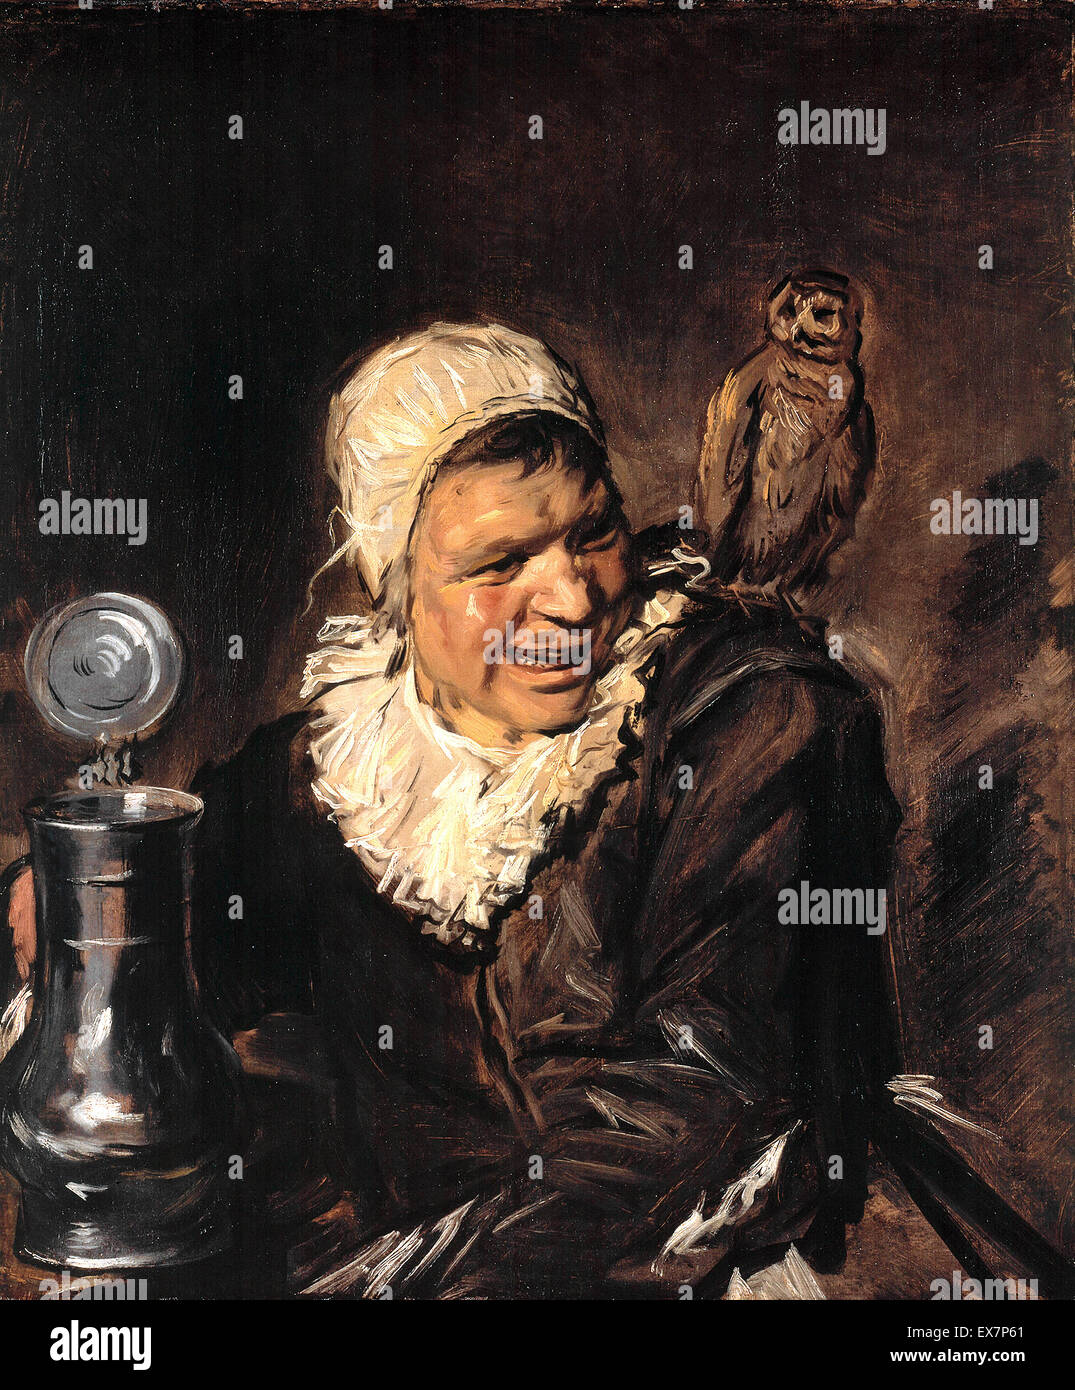 Frans Hals, Malle Babbe. Circa 1633. Oil on canvas. Gemaldegalerie, Berlin, Germany. Stock Photo